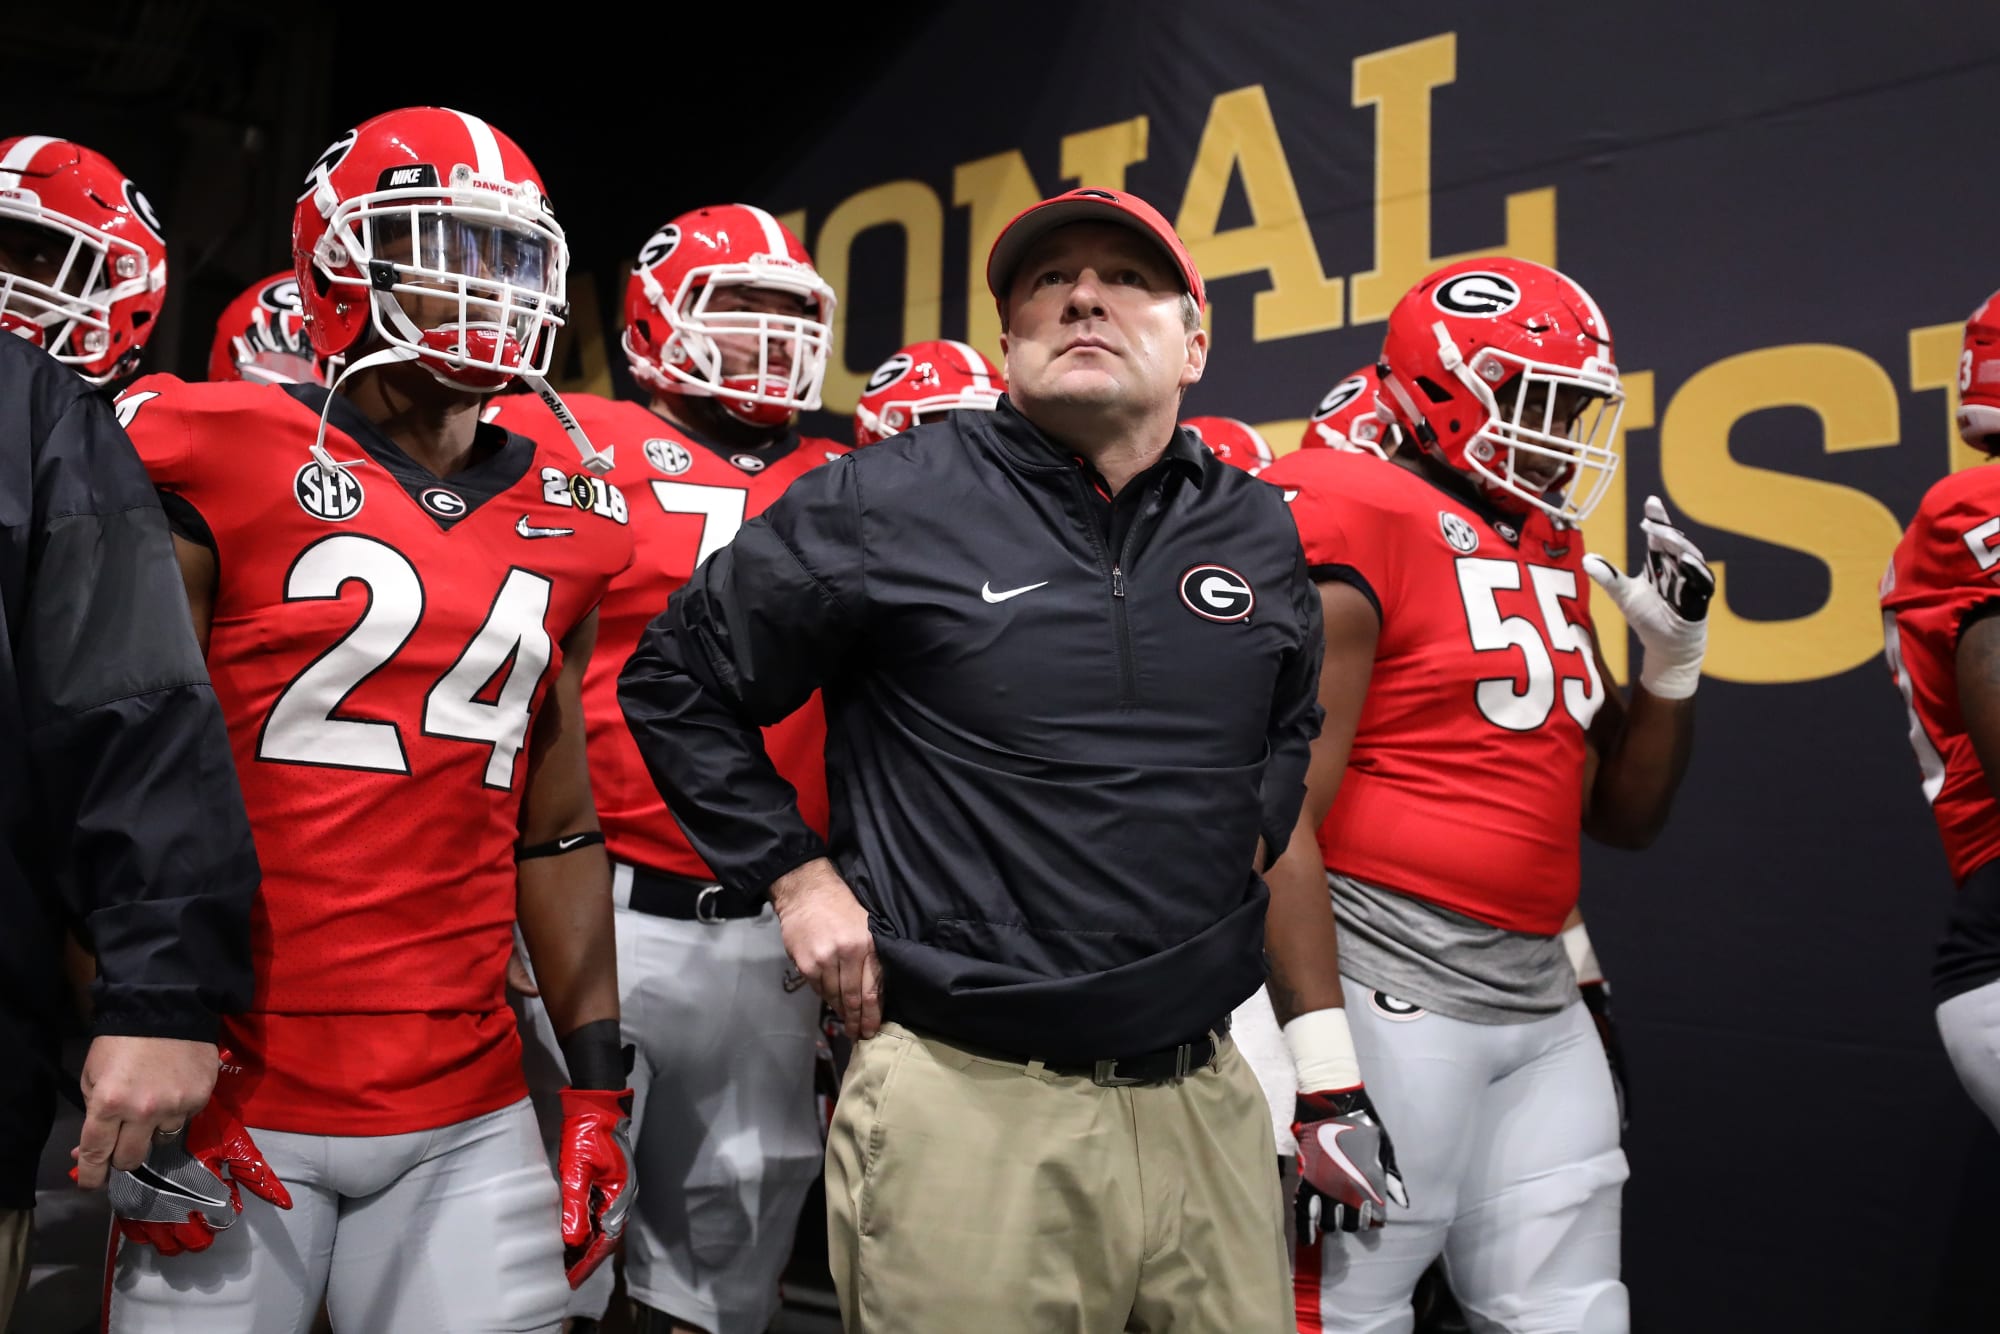 Georgia football's Kirby Smart on spring practice, national title